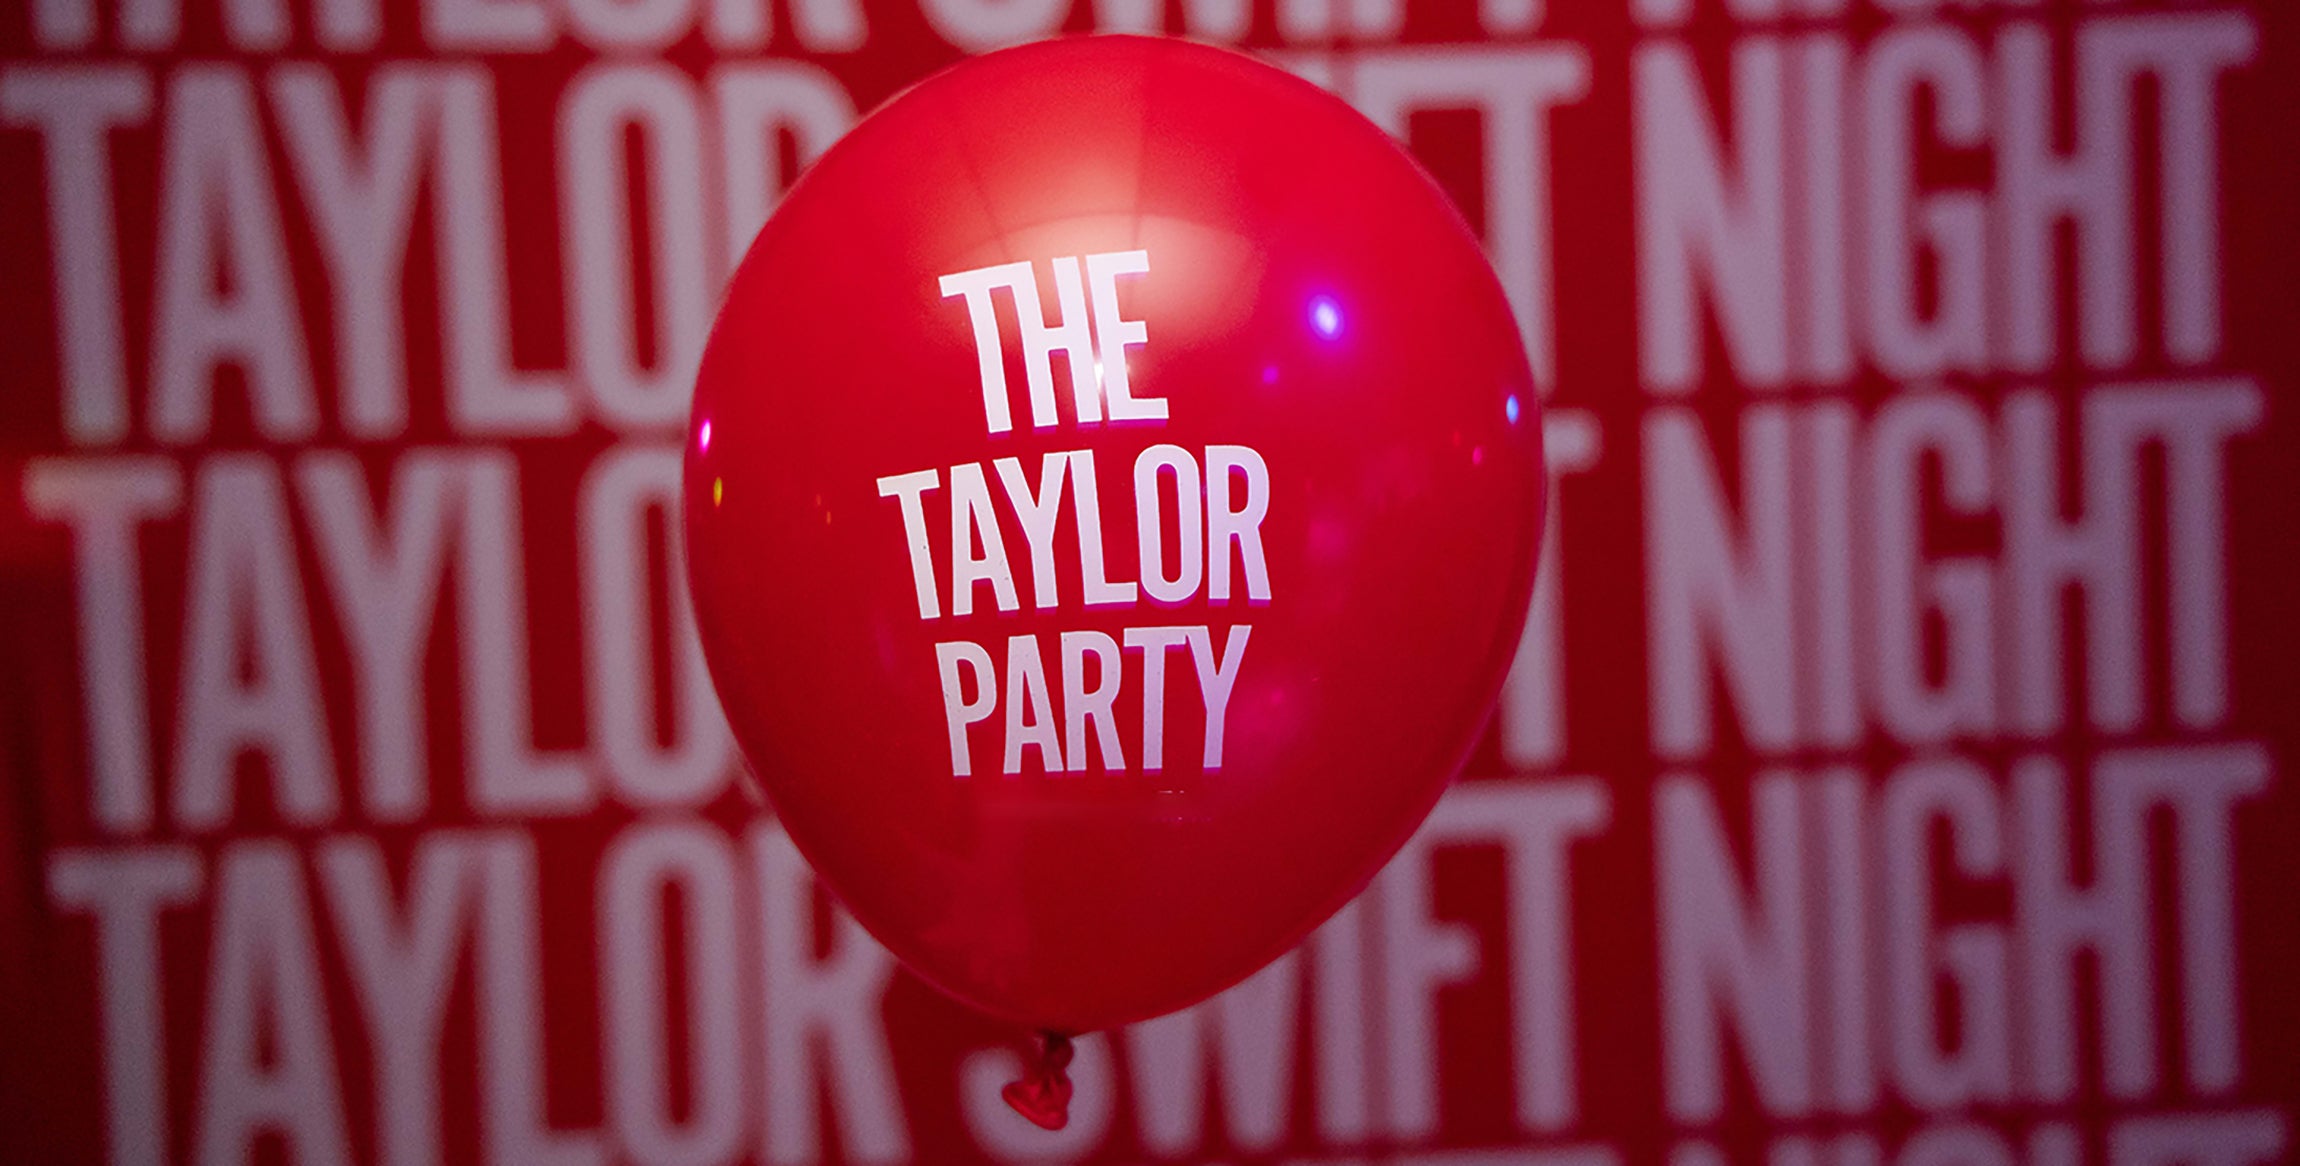 The Taylor Party: Taylor Swift Night - (18+) free presale code for concert tickets in Grand Rapids, MI (GLC Live at 20 Monroe)